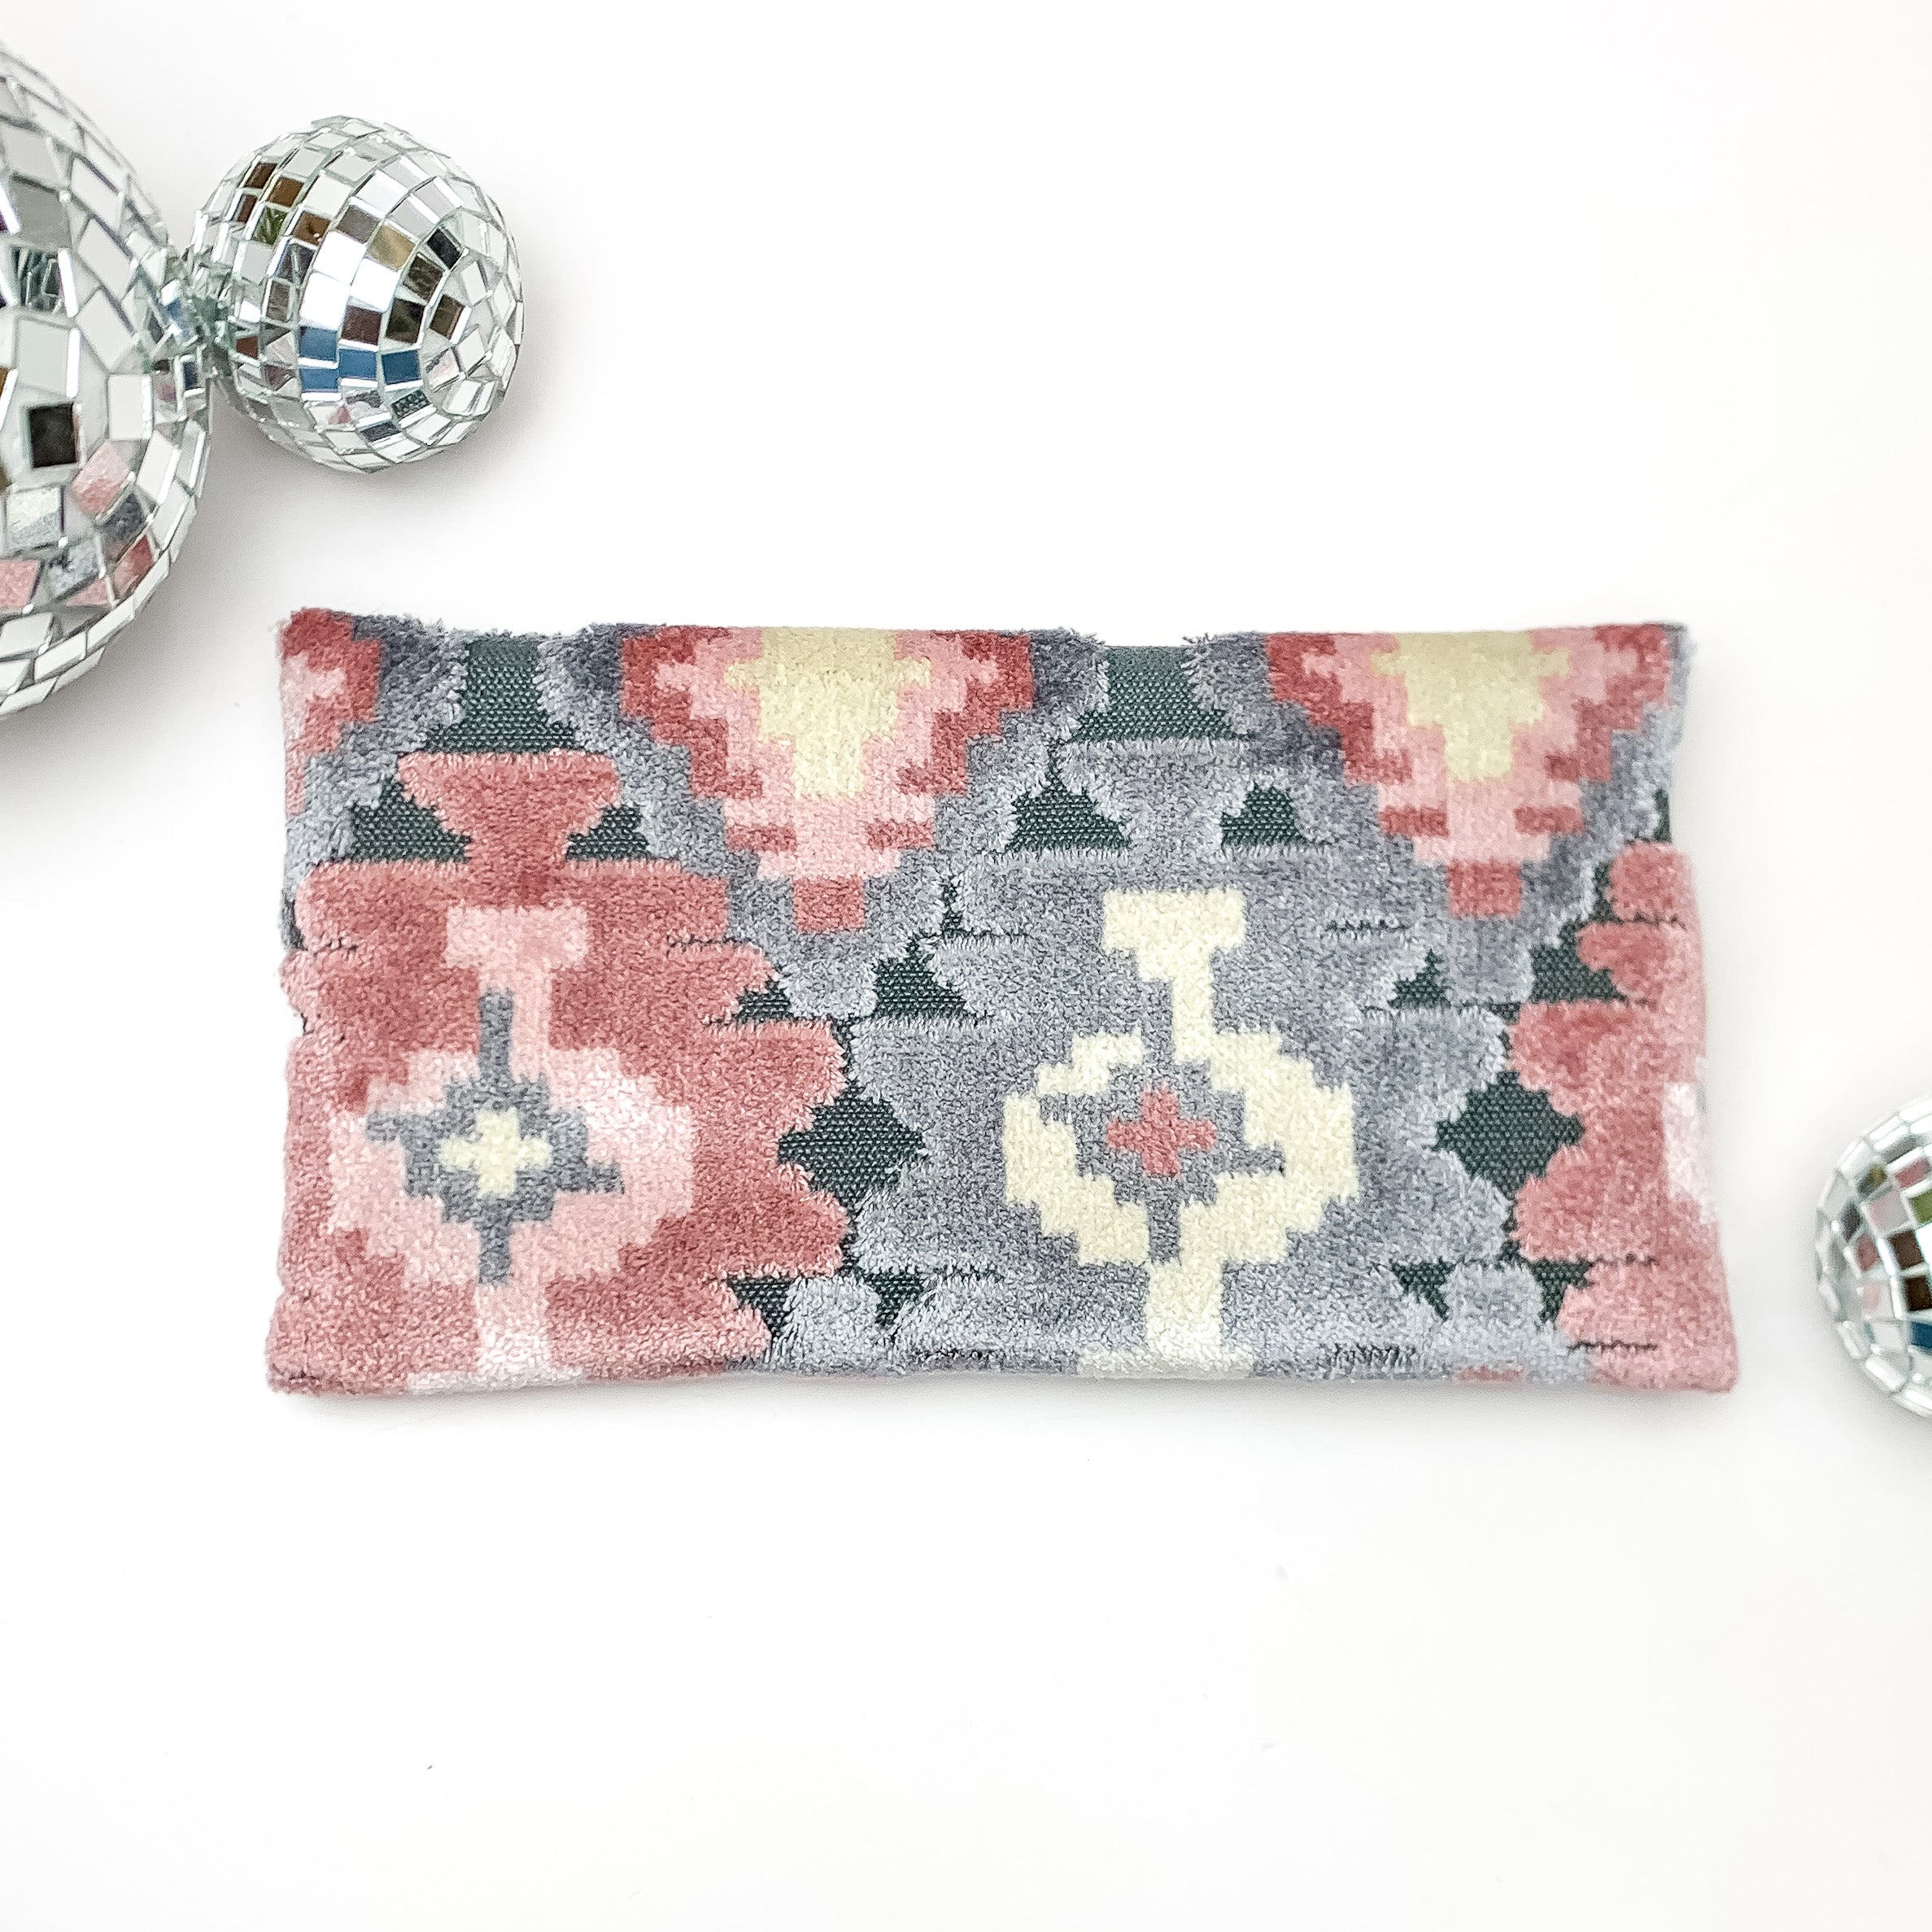 Makeup Junkie | Mini Blush Aztec Lay Flat Bag in Blush Pink and Grey Mix - Giddy Up Glamour Boutique